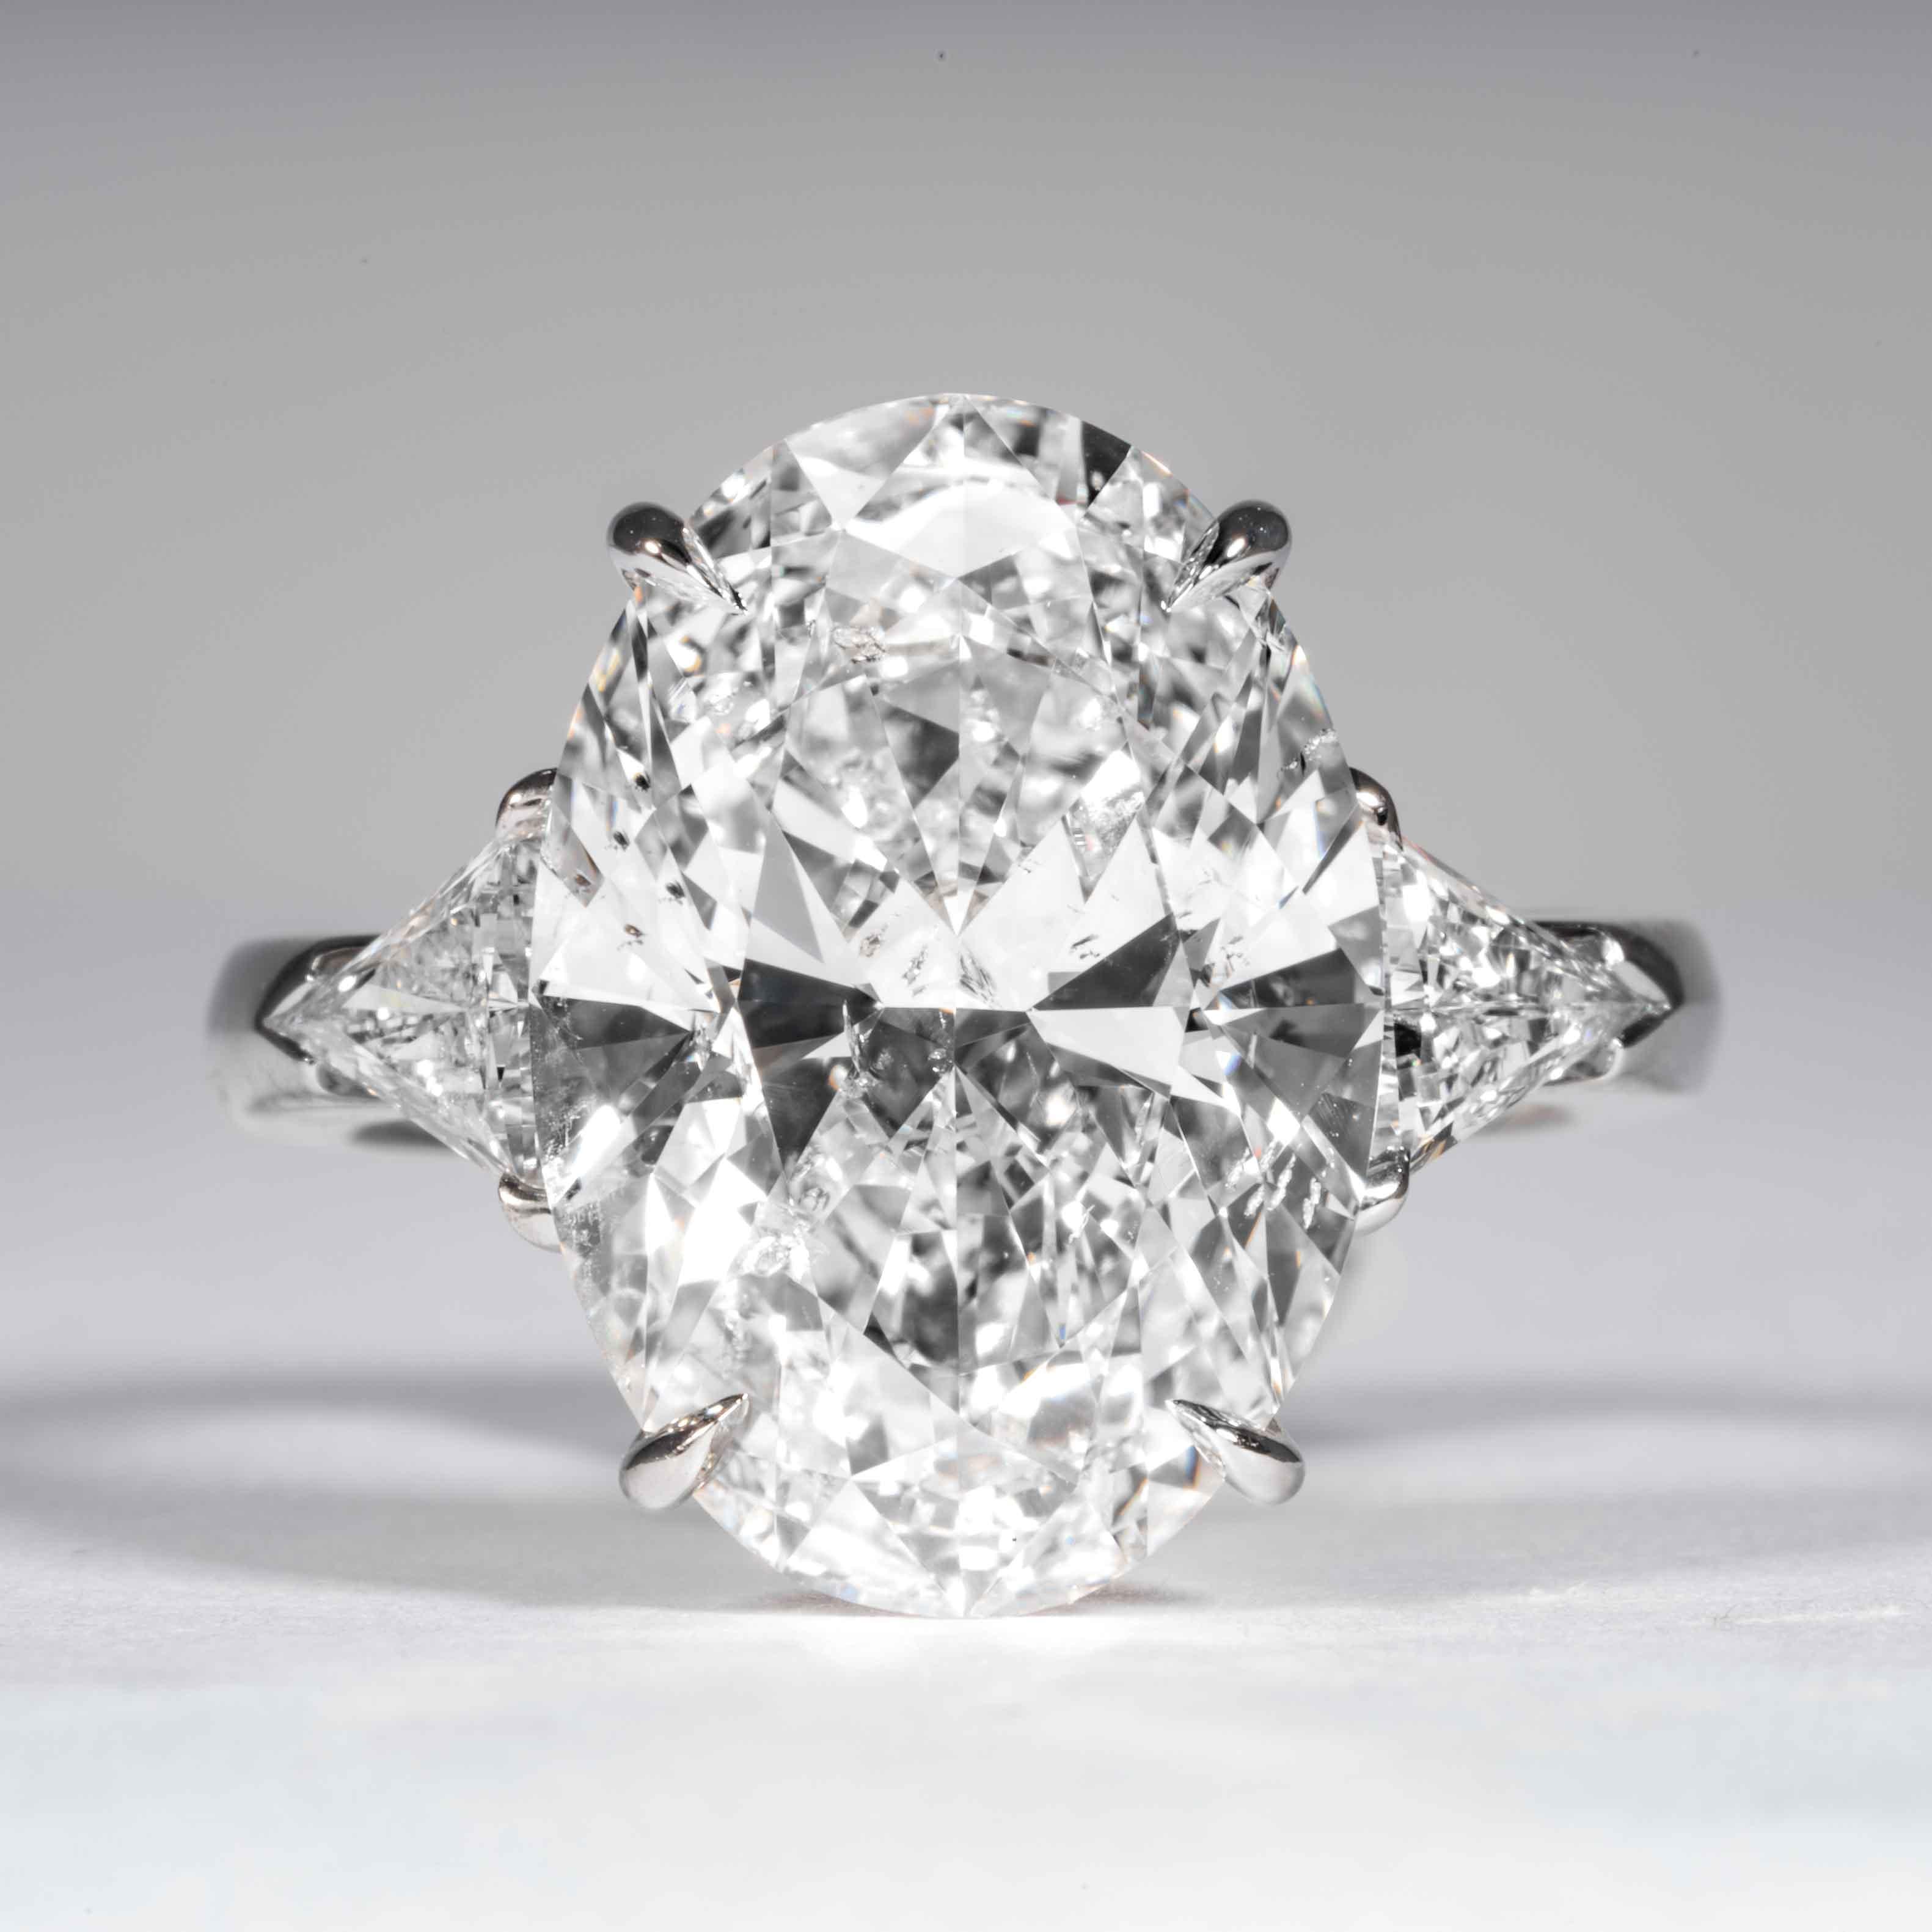 This finely cut oval diamond ring is offered by Shreve, Crump & Low. This 9.08 carat GIA Certified F SI2 Oval cut diamond measuring 16.82 x 11.76 x 7.12mm is custom set in a handcrafted Shreve, Crump & Low platinum 3-stone ring. The 9.08 carat